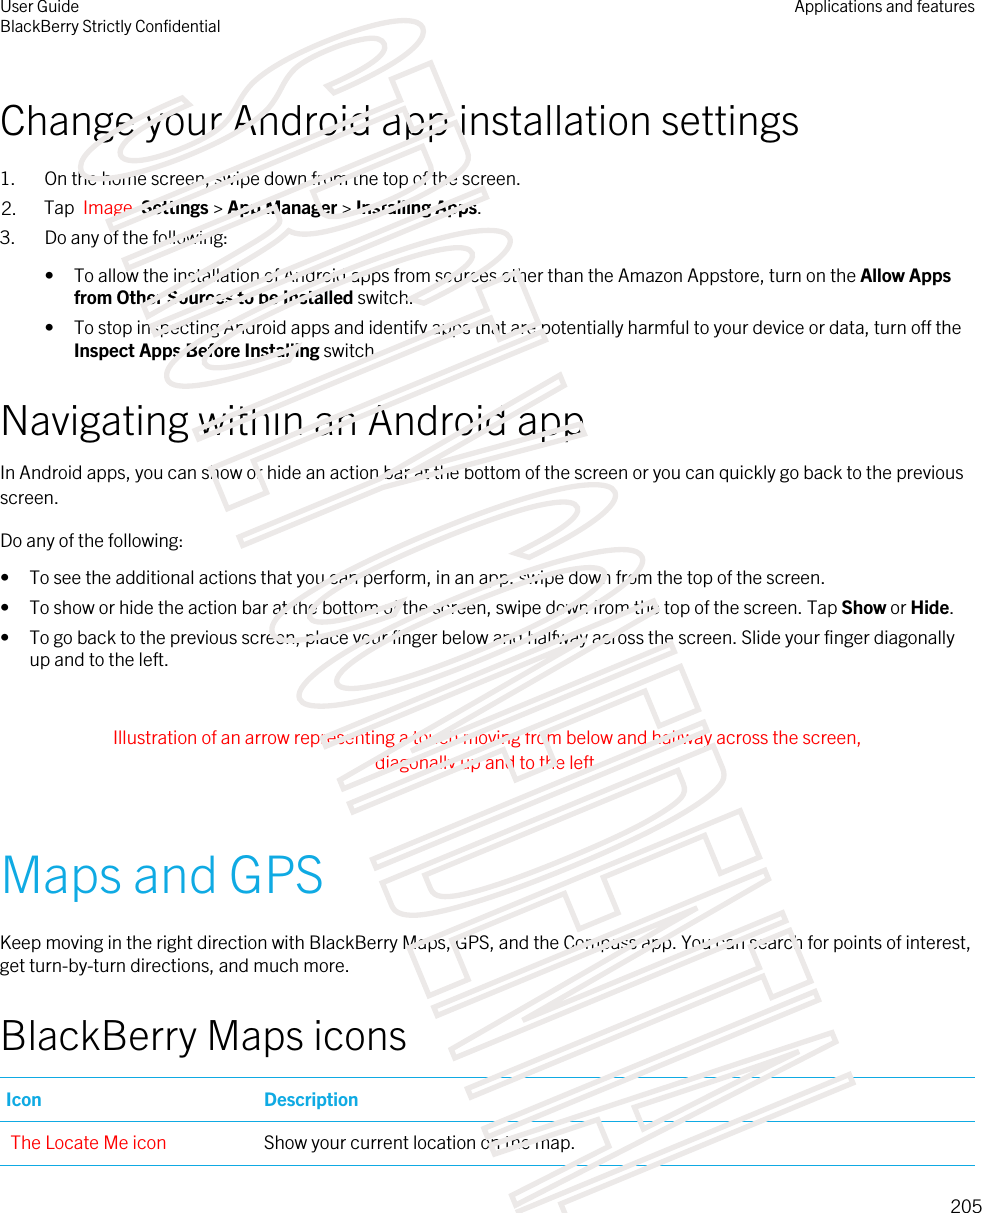 Change your Android app installation settings1. On the home screen, swipe down from the top of the screen.2. Tap  Image  Settings &gt; App Manager &gt; Installing Apps.3. Do any of the following:• To allow the installation of Android apps from sources other than the Amazon Appstore, turn on the Allow Apps from Other Sources to be Installed switch.• To stop inspecting Android apps and identify apps that are potentially harmful to your device or data, turn off the Inspect Apps Before Installing switch.Navigating within an Android appIn Android apps, you can show or hide an action bar at the bottom of the screen or you can quickly go back to the previous screen.Do any of the following:• To see the additional actions that you can perform, in an app, swipe down from the top of the screen.• To show or hide the action bar at the bottom of the screen, swipe down from the top of the screen. Tap Show or Hide.• To go back to the previous screen, place your finger below and halfway across the screen. Slide your finger diagonally up and to the left. Illustration of an arrow representing a touch moving from below and halfway across the screen, diagonally up and to the left. Maps and GPSKeep moving in the right direction with BlackBerry Maps, GPS, and the Compass app. You can search for points of interest, get turn-by-turn directions, and much more.BlackBerry Maps iconsIcon DescriptionThe Locate Me icon Show your current location on the map.User GuideBlackBerry Strictly ConfidentialApplications and features205STRICTLY CONFIDENTIAL